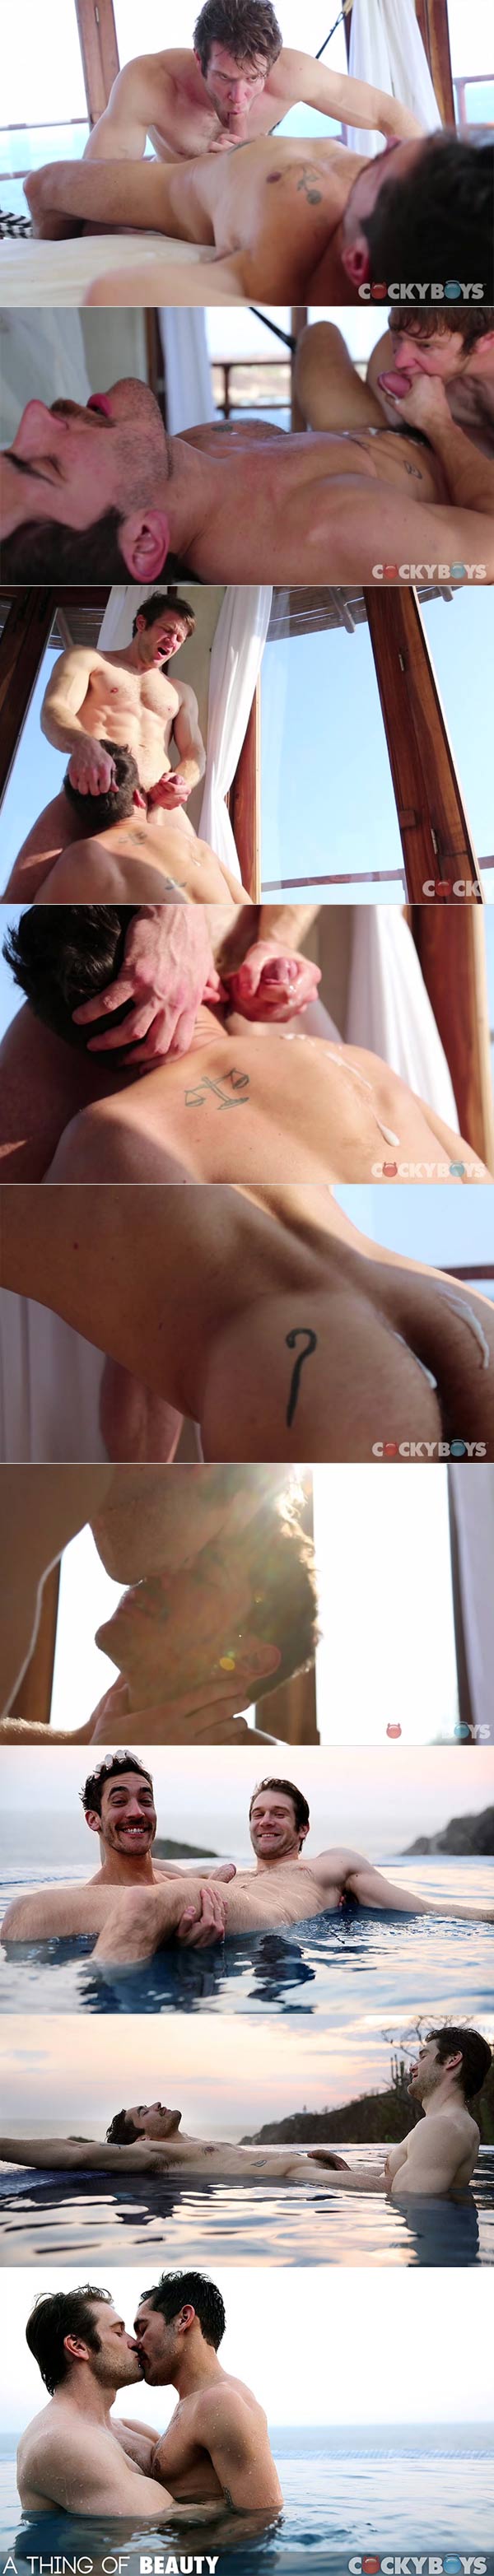 A Thing of Beauty: Part I (Colby Keller & Dale Cooper) at CockyBoys.com